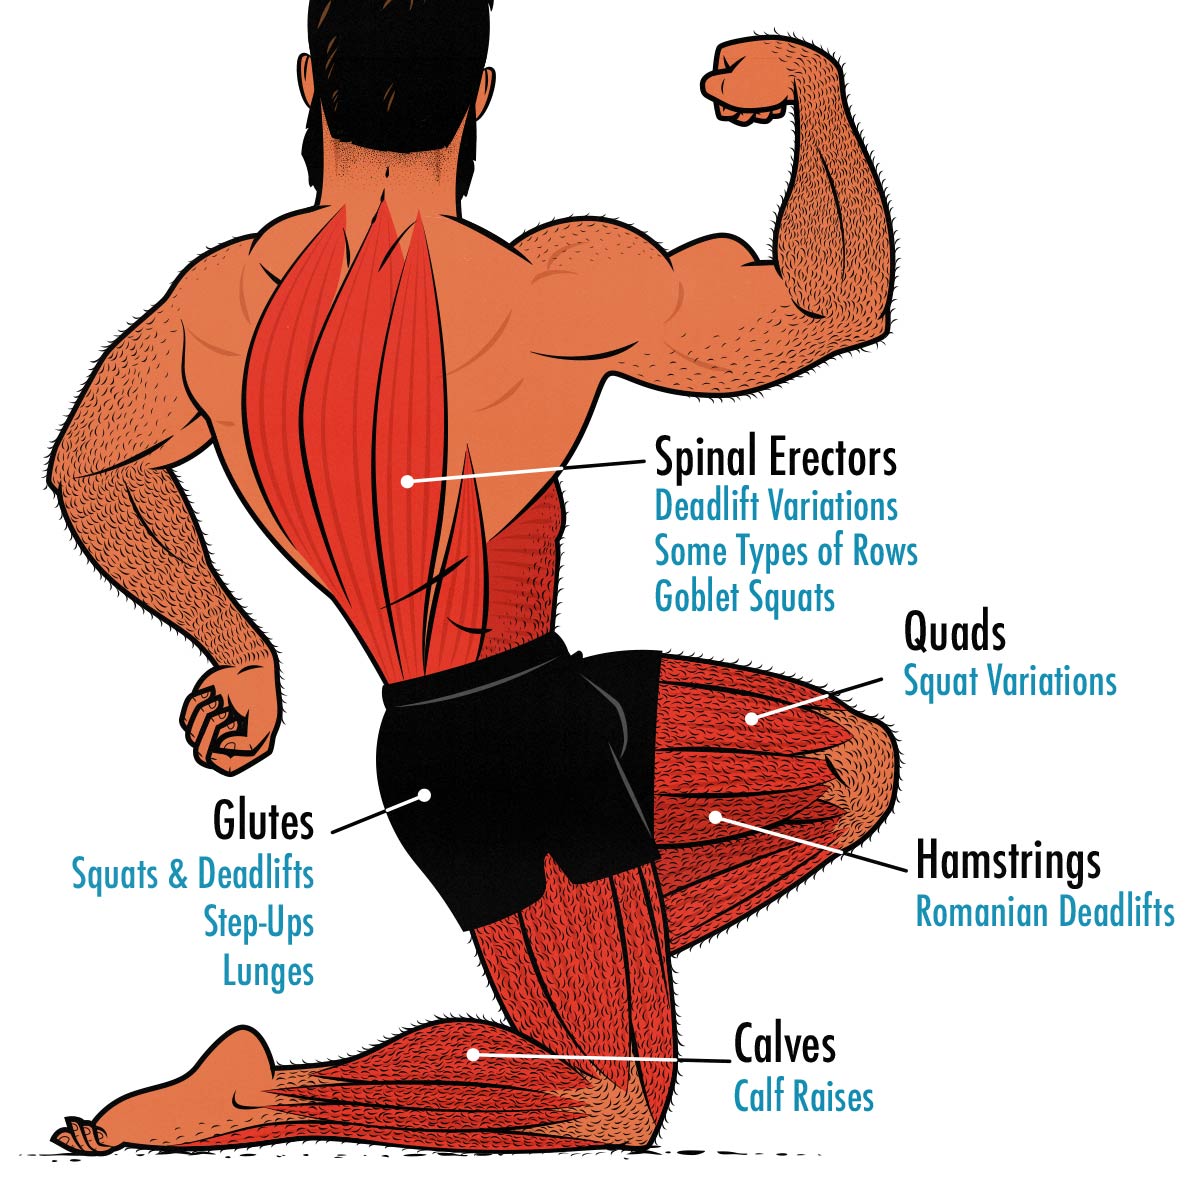 Diagram showing the best dumbbell exercises for each leg muscle: the hips, hamstrings, quads, and calves.